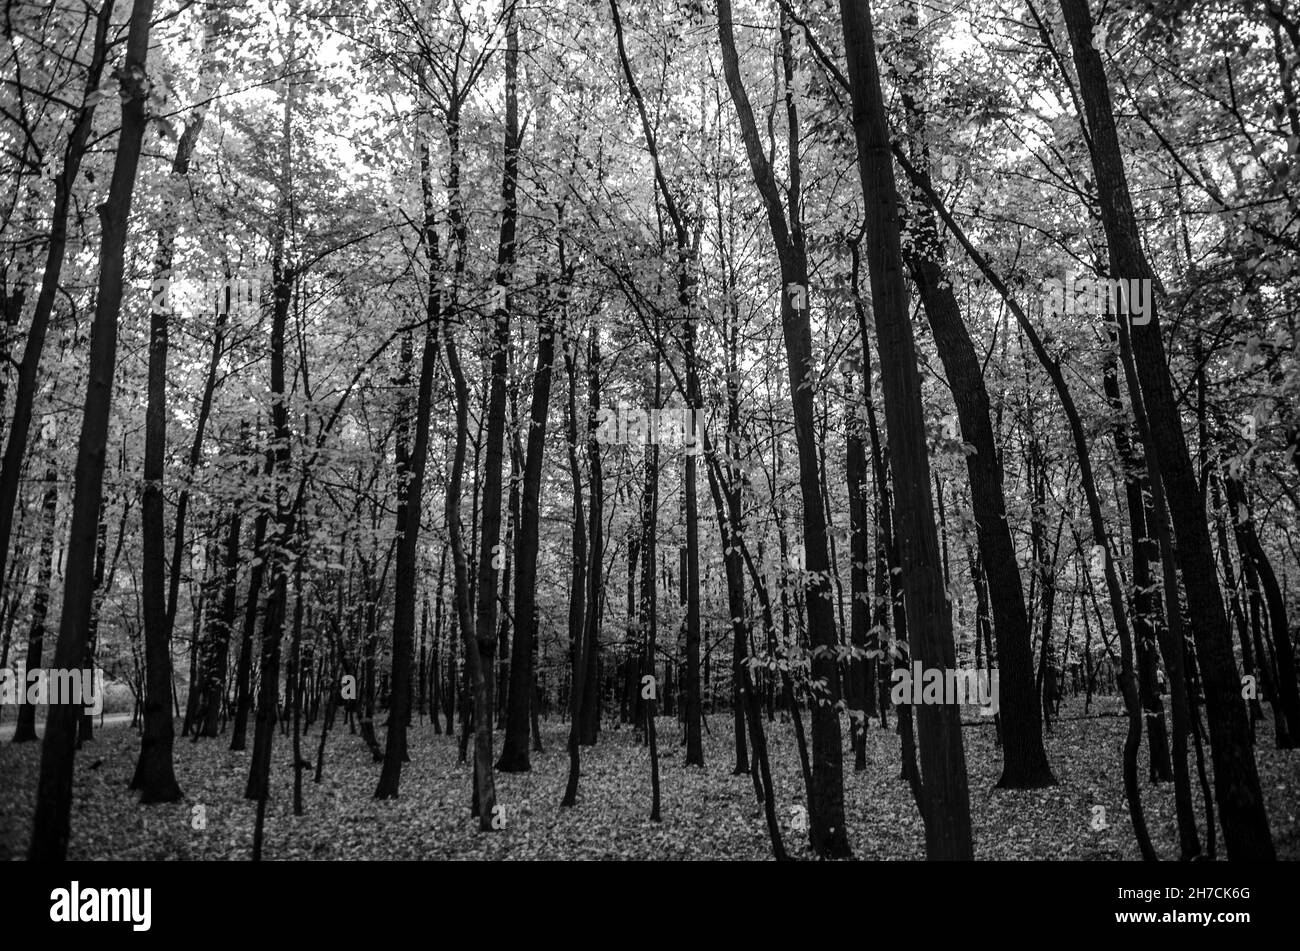 High contrast, black and white autumn forest photo Stock Photo